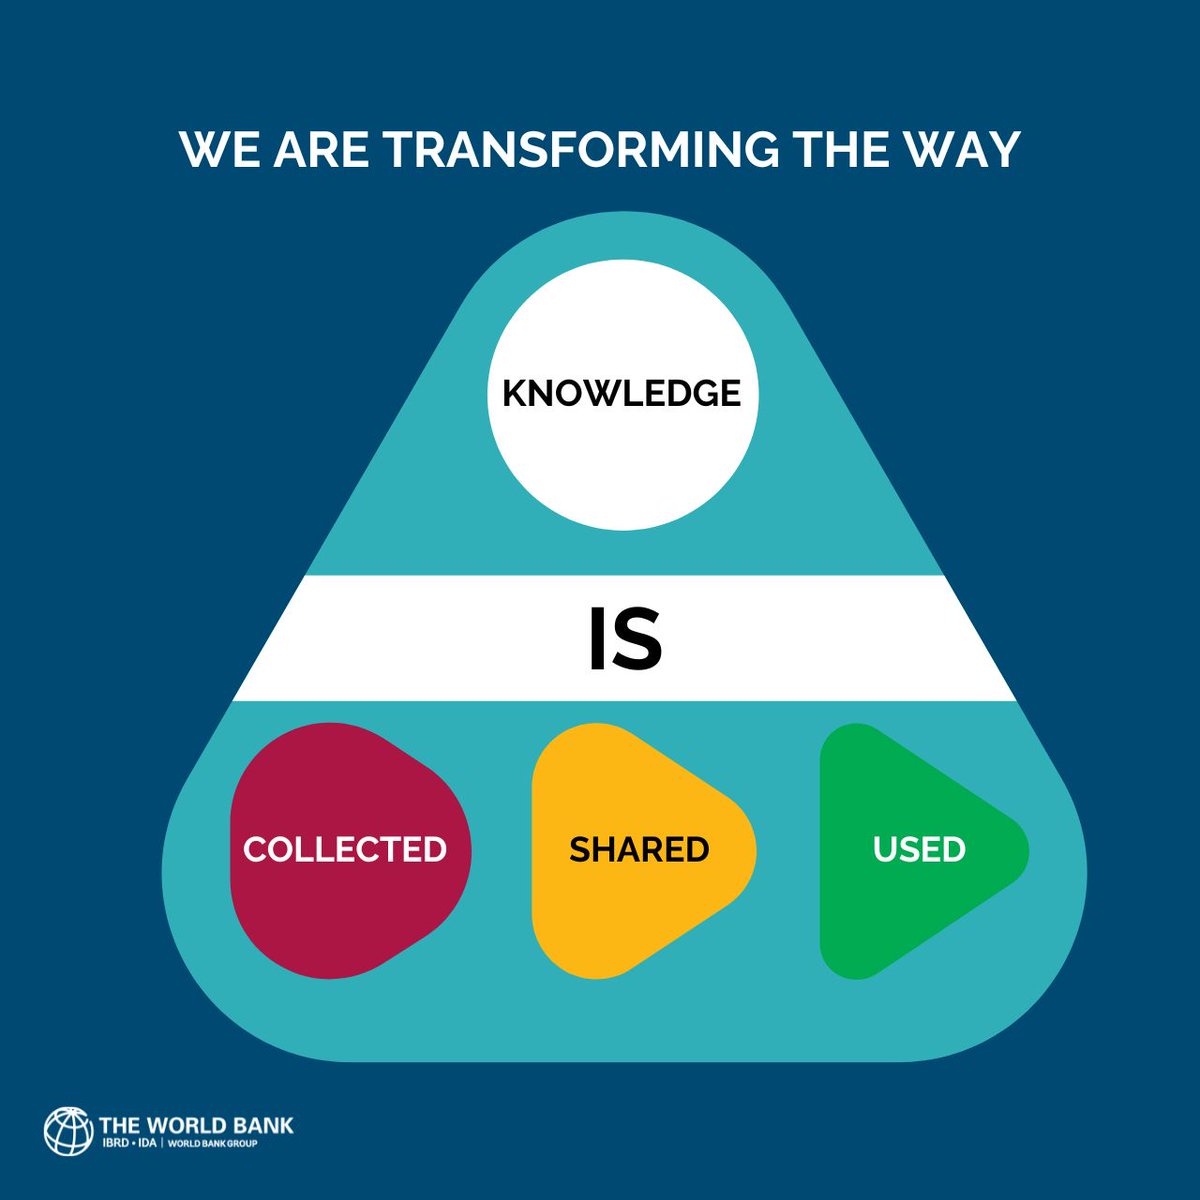 The @WorldBank cannot expand its capacity without also elevating the role of knowledge. That’s why we’re changing our approach to knowledge to better respond to the countries’ evolving development priorities. Read more on my recent blog: wrld.bg/g1sy50RERkU